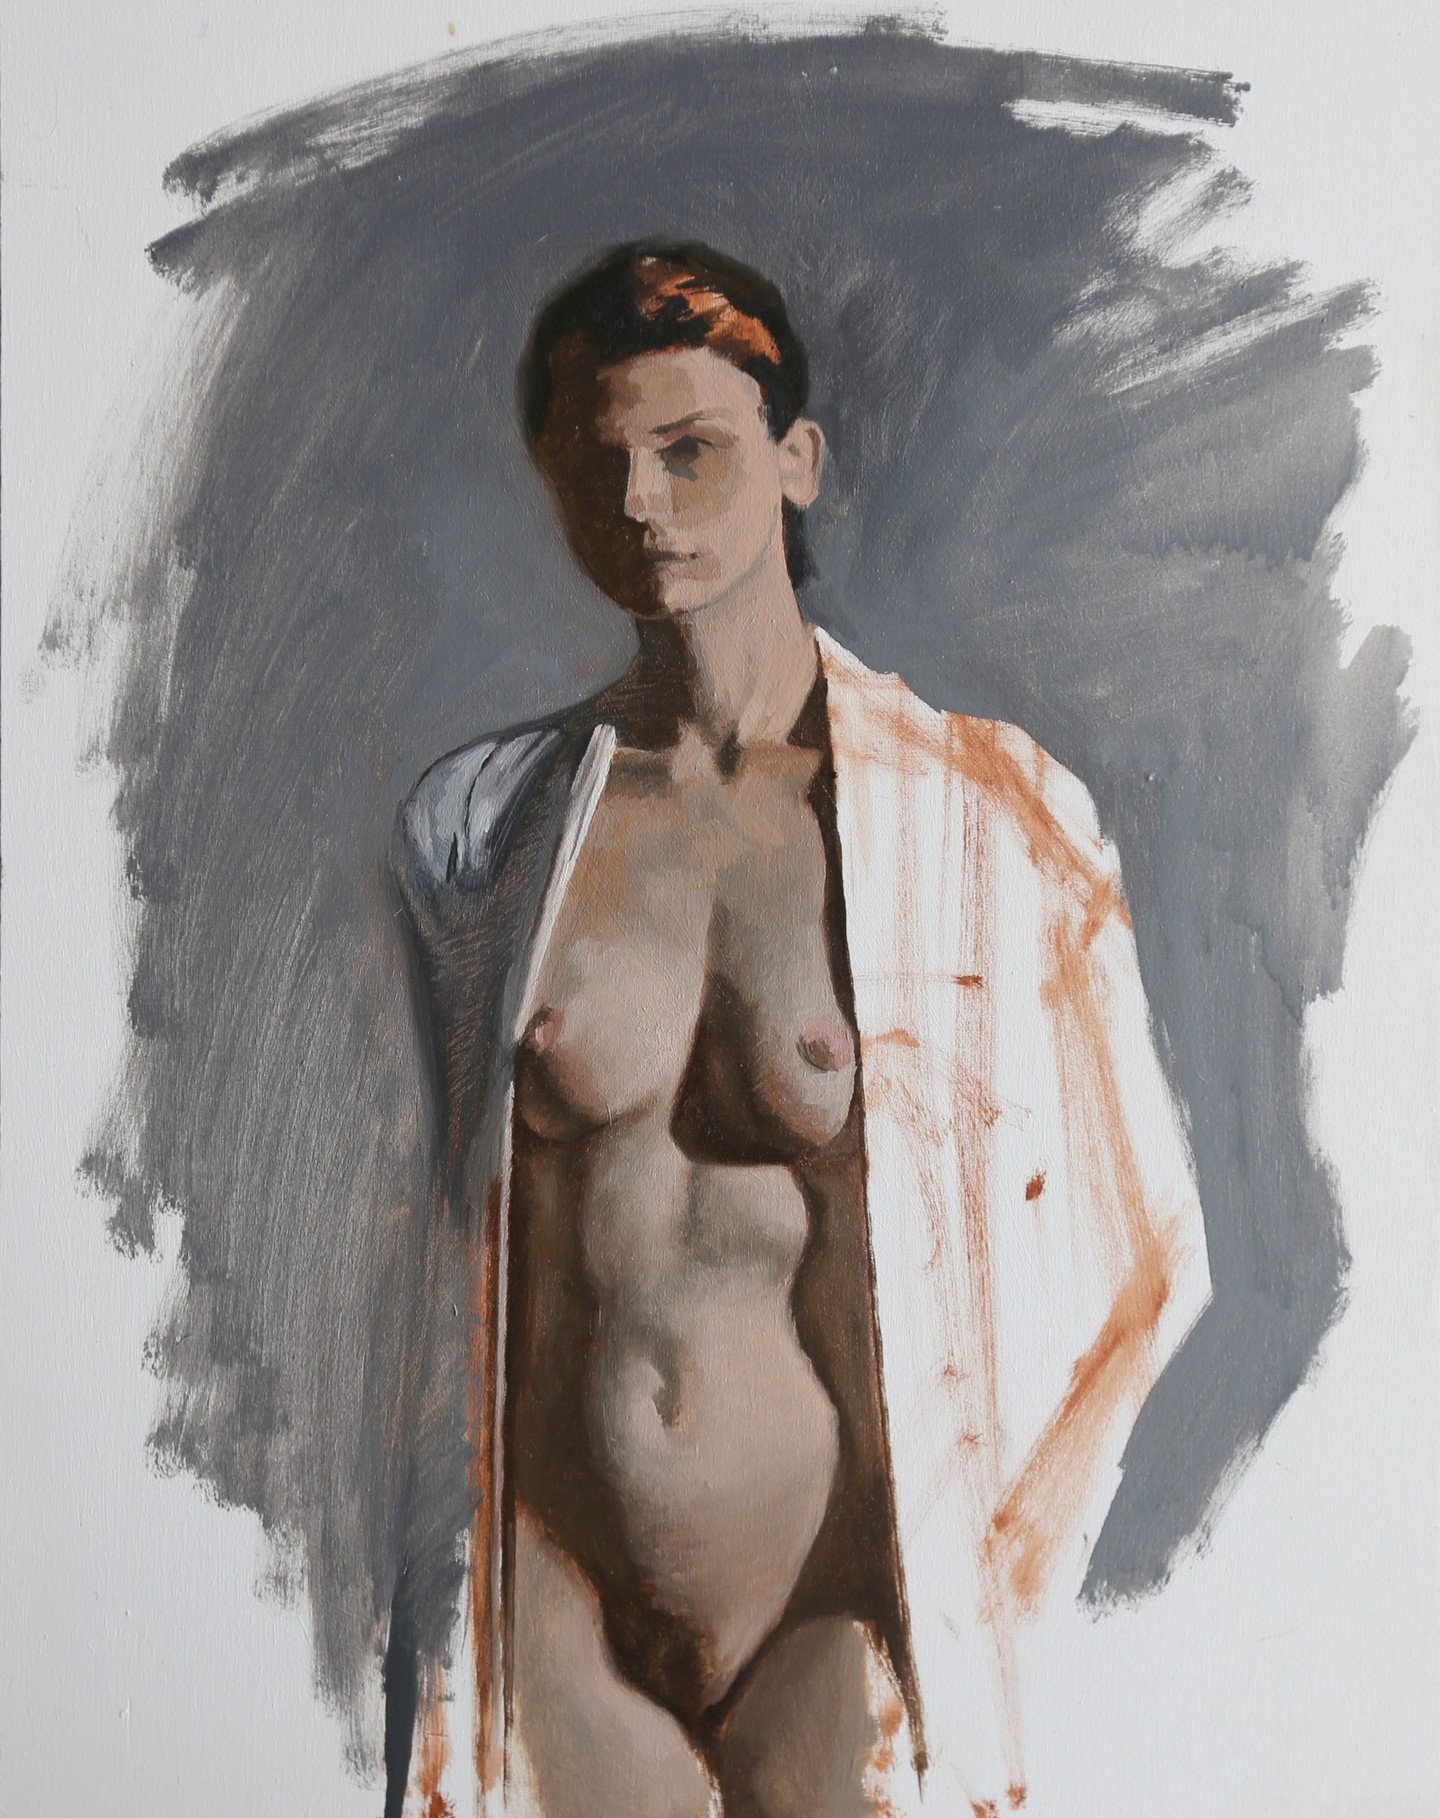 Studio sale 2.
Figure study sketch. 
30 x 40cm oil on panel. Signed.
100 euro (+ shipping)
This figure study was done as a practice in observation specifically of the varying temperatures of skin. I wanted to understand more the play between the oran